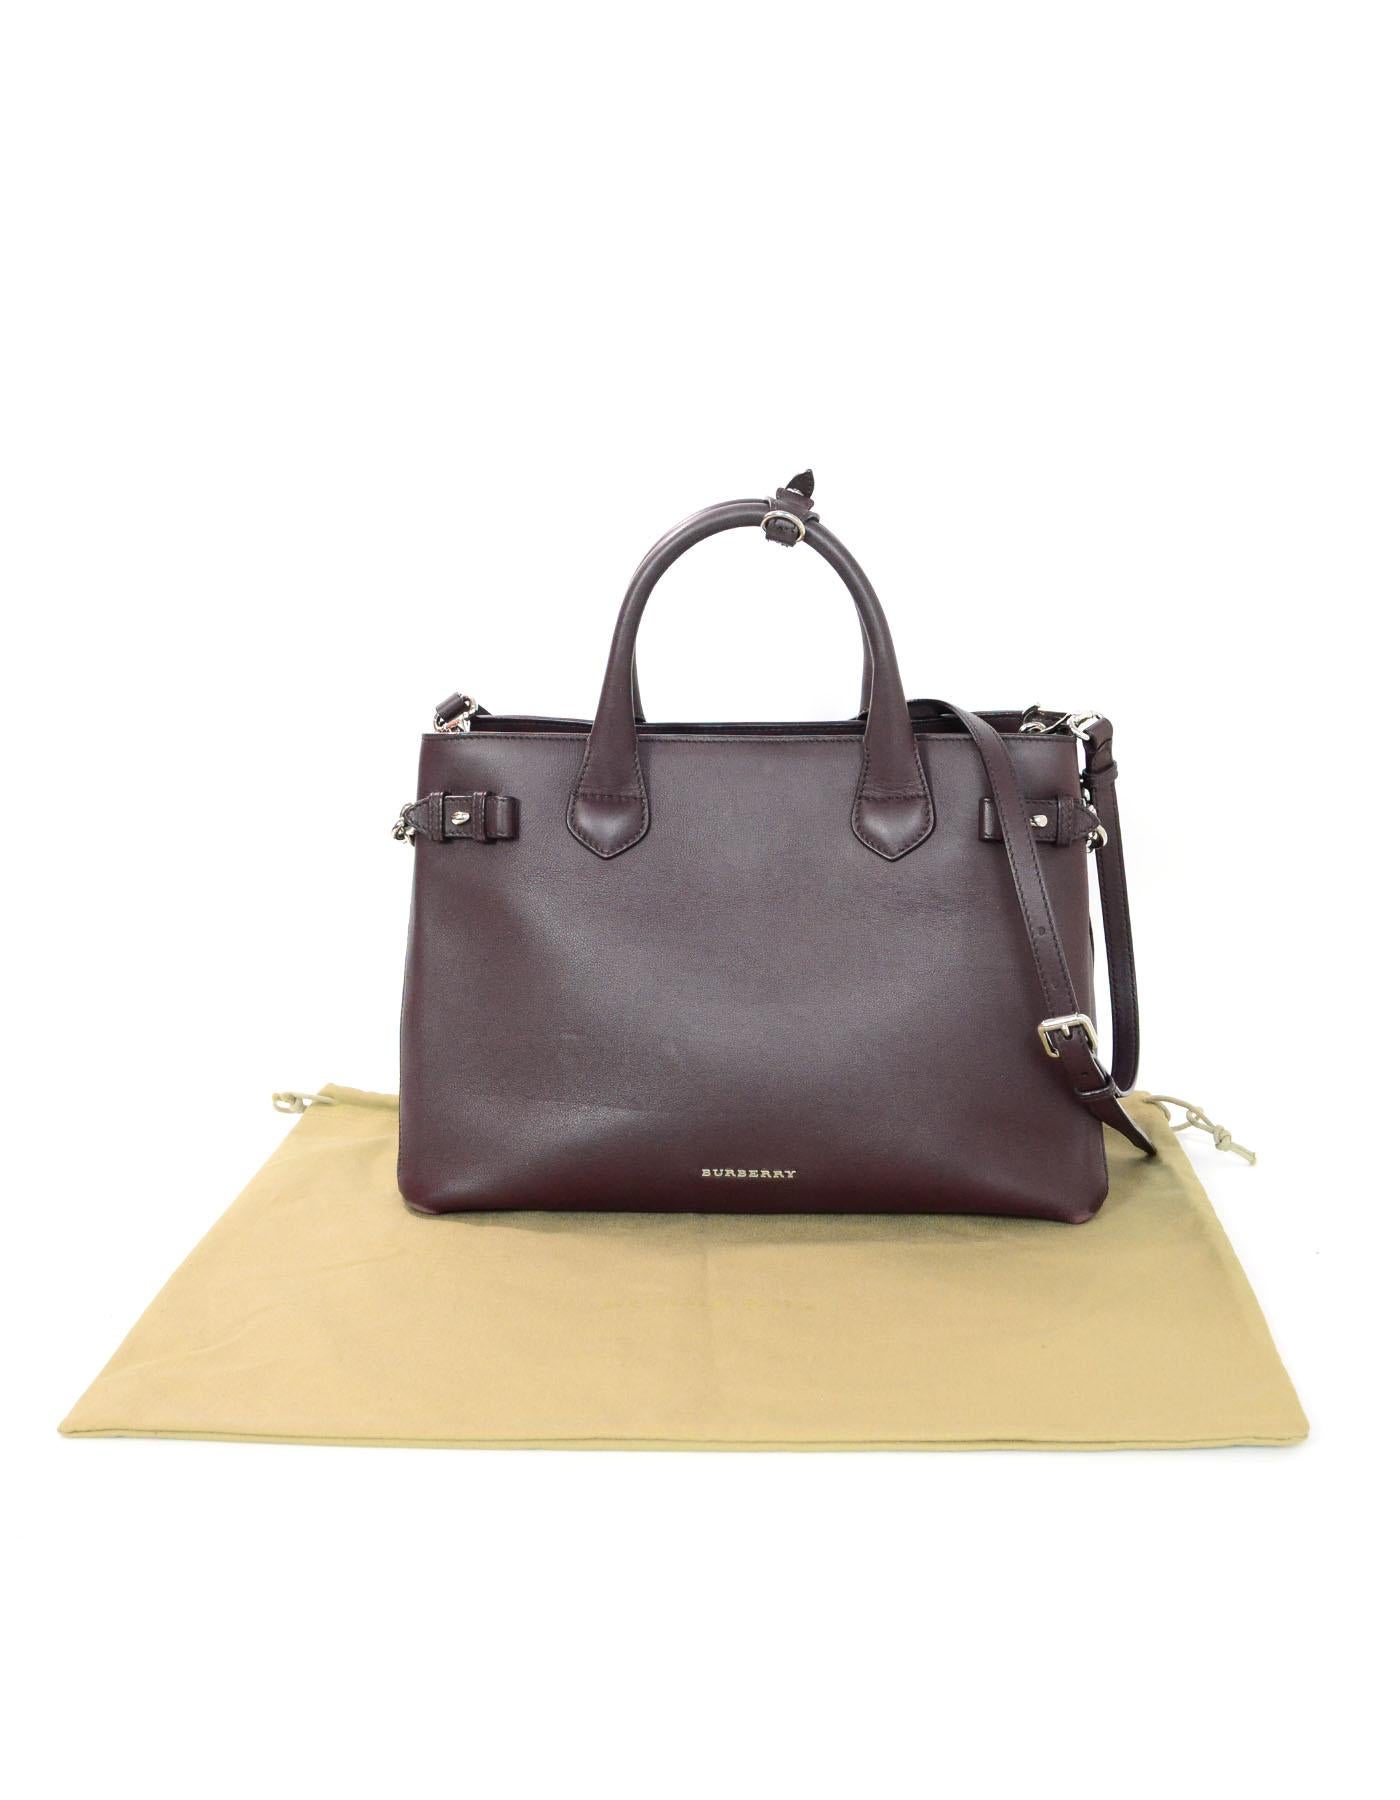 Burberry Brown Leather Banner Satchel Bag with Strap  5